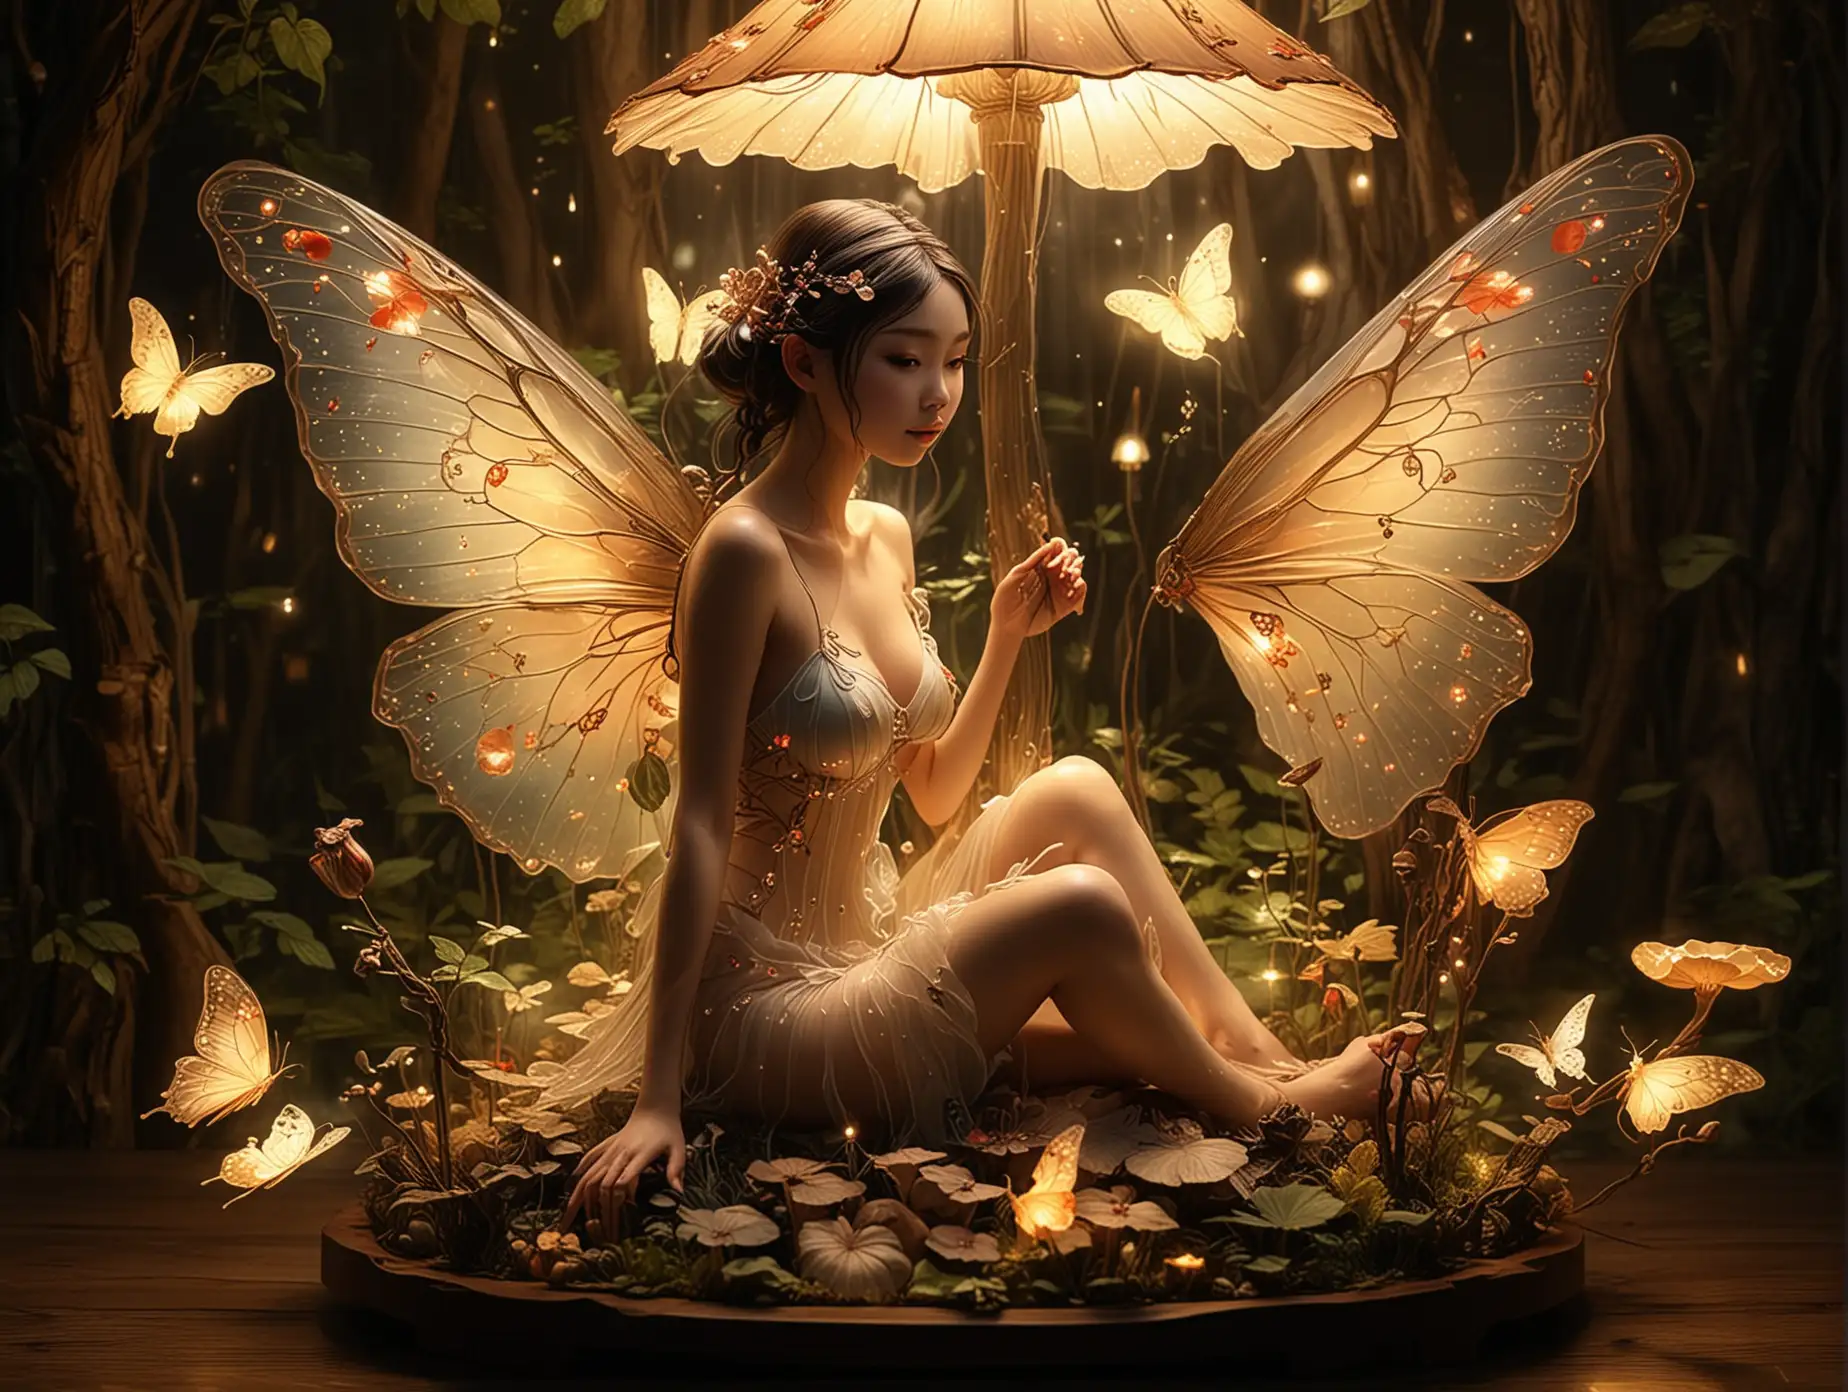 beautiful asian fairy / beautiful translucent butterfly like wings/ bathing in the mythical mushroom forest at night holding lamp body size : 36-24-36